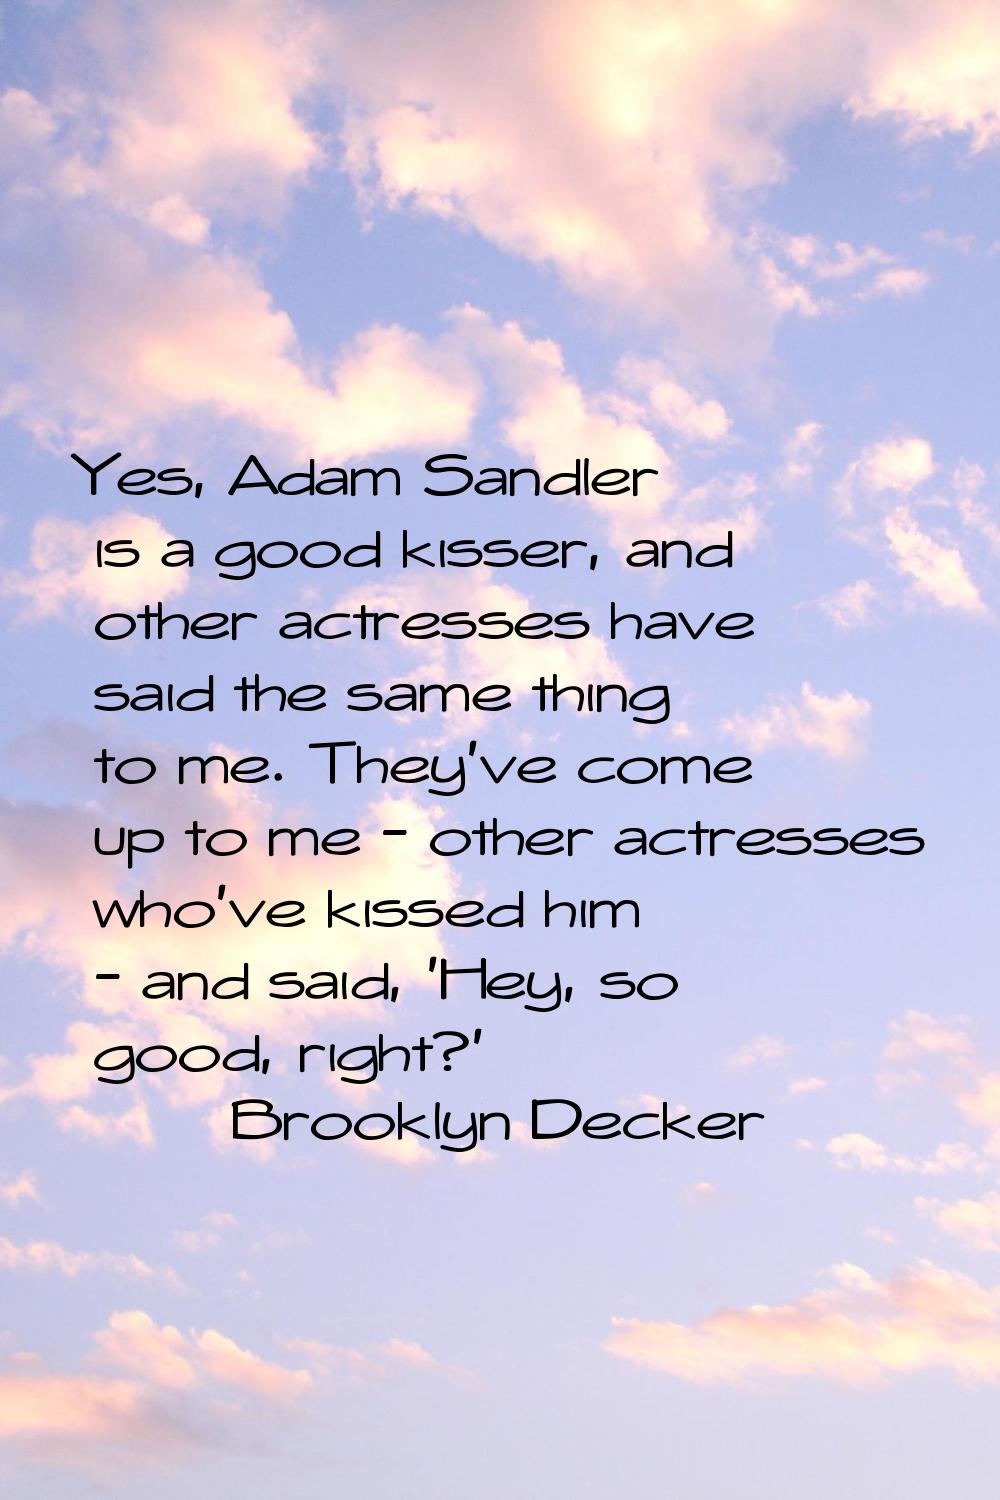 Yes, Adam Sandler is a good kisser, and other actresses have said the same thing to me. They've com